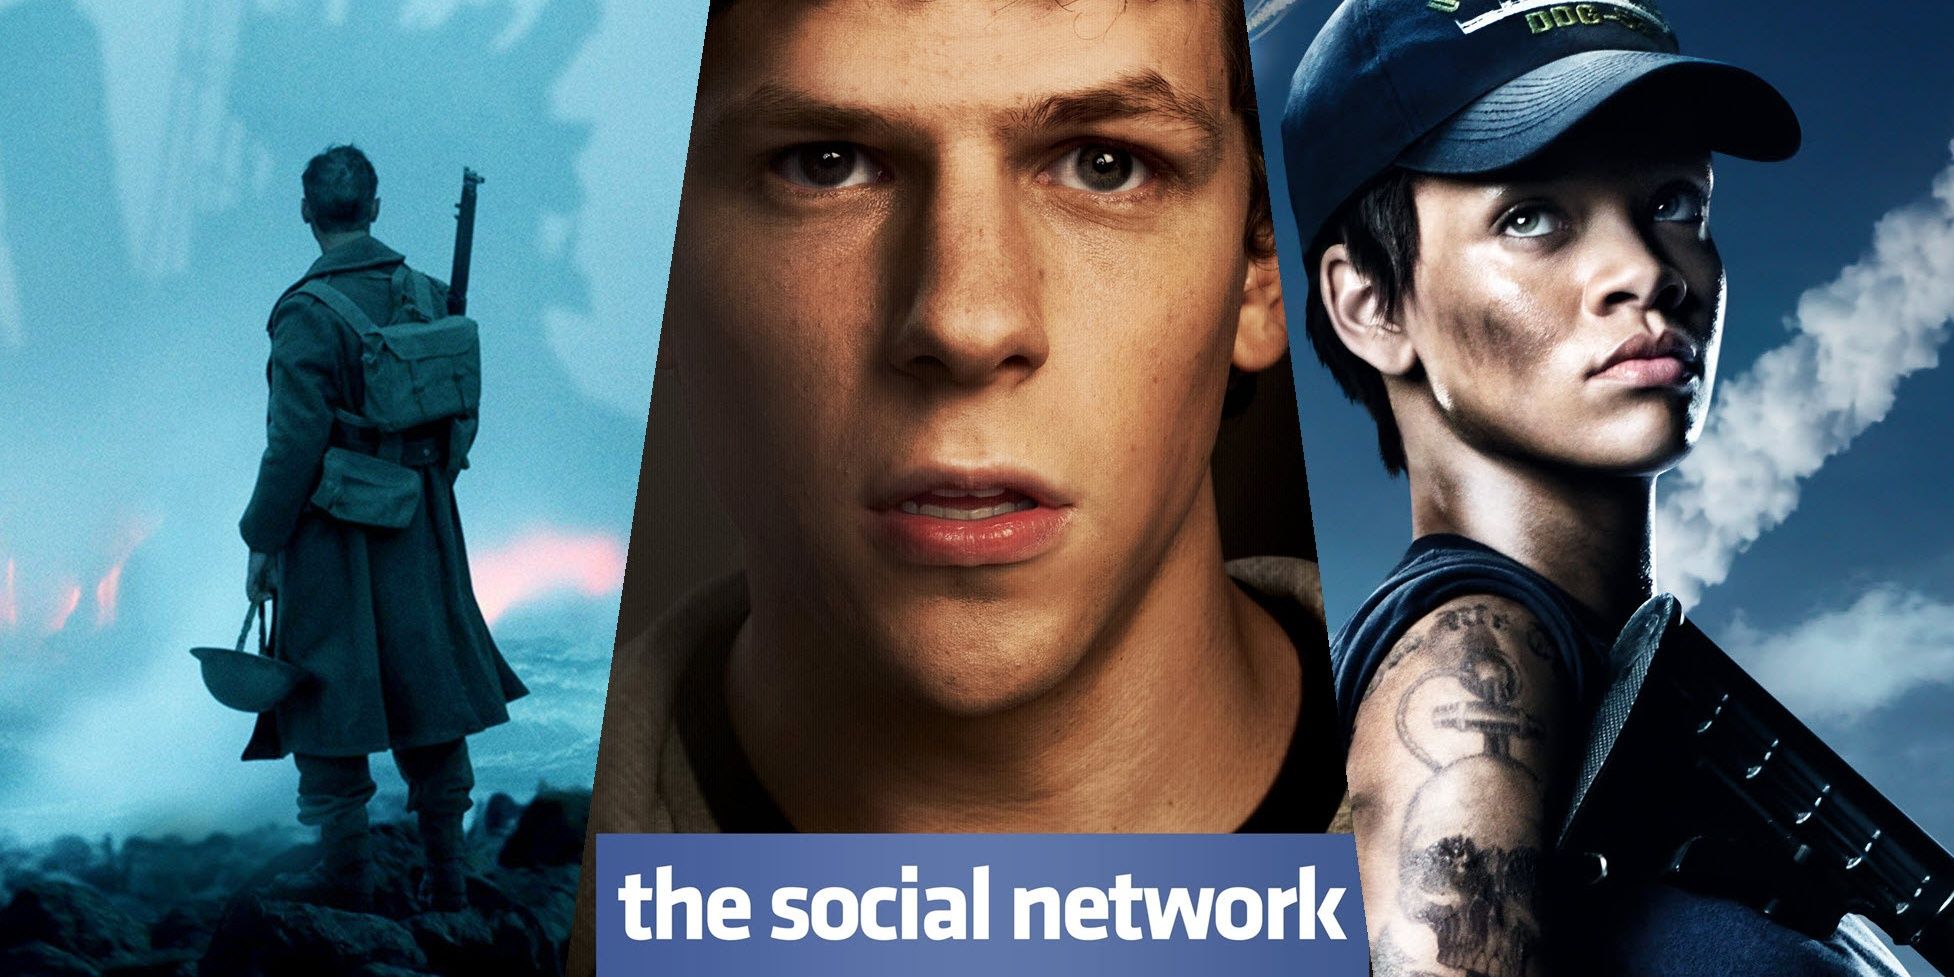 Collage featuring Rihanna in Battleship, Jesse Eisenberg in The Social Network & Harry Styles in Dunkirk